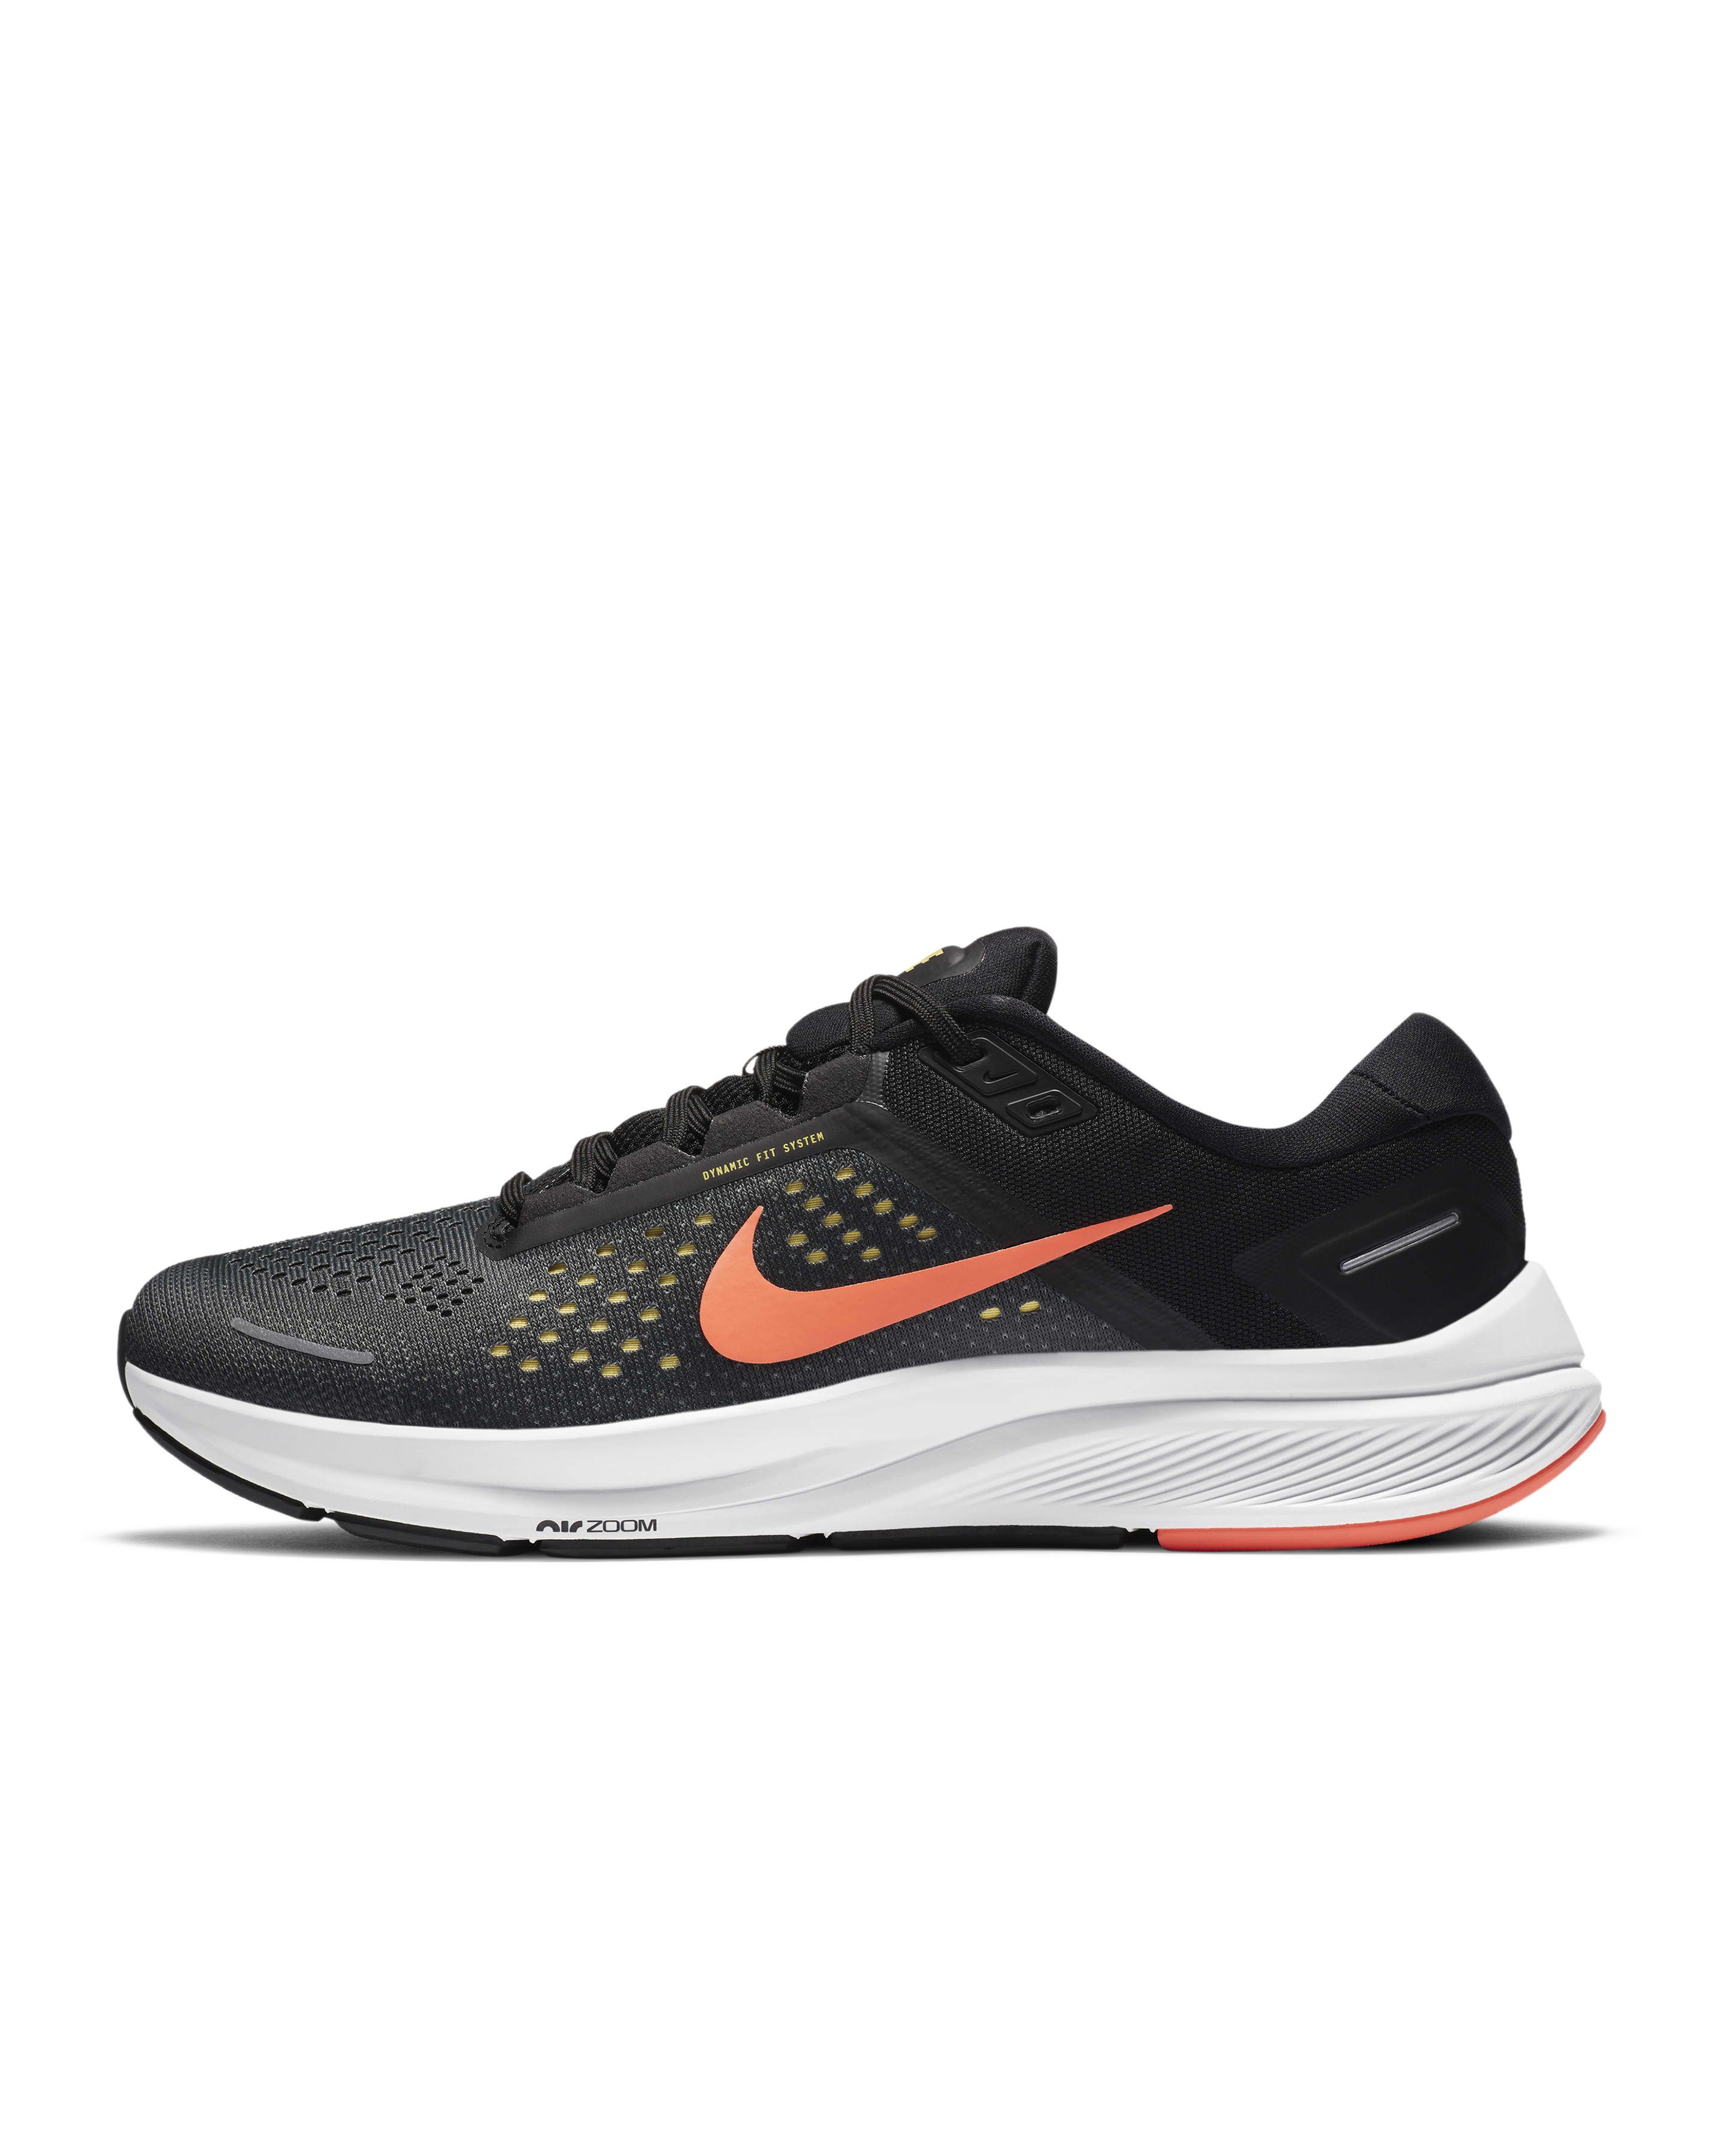 Men's Running Shoe Nike Air Zoom Structure 23